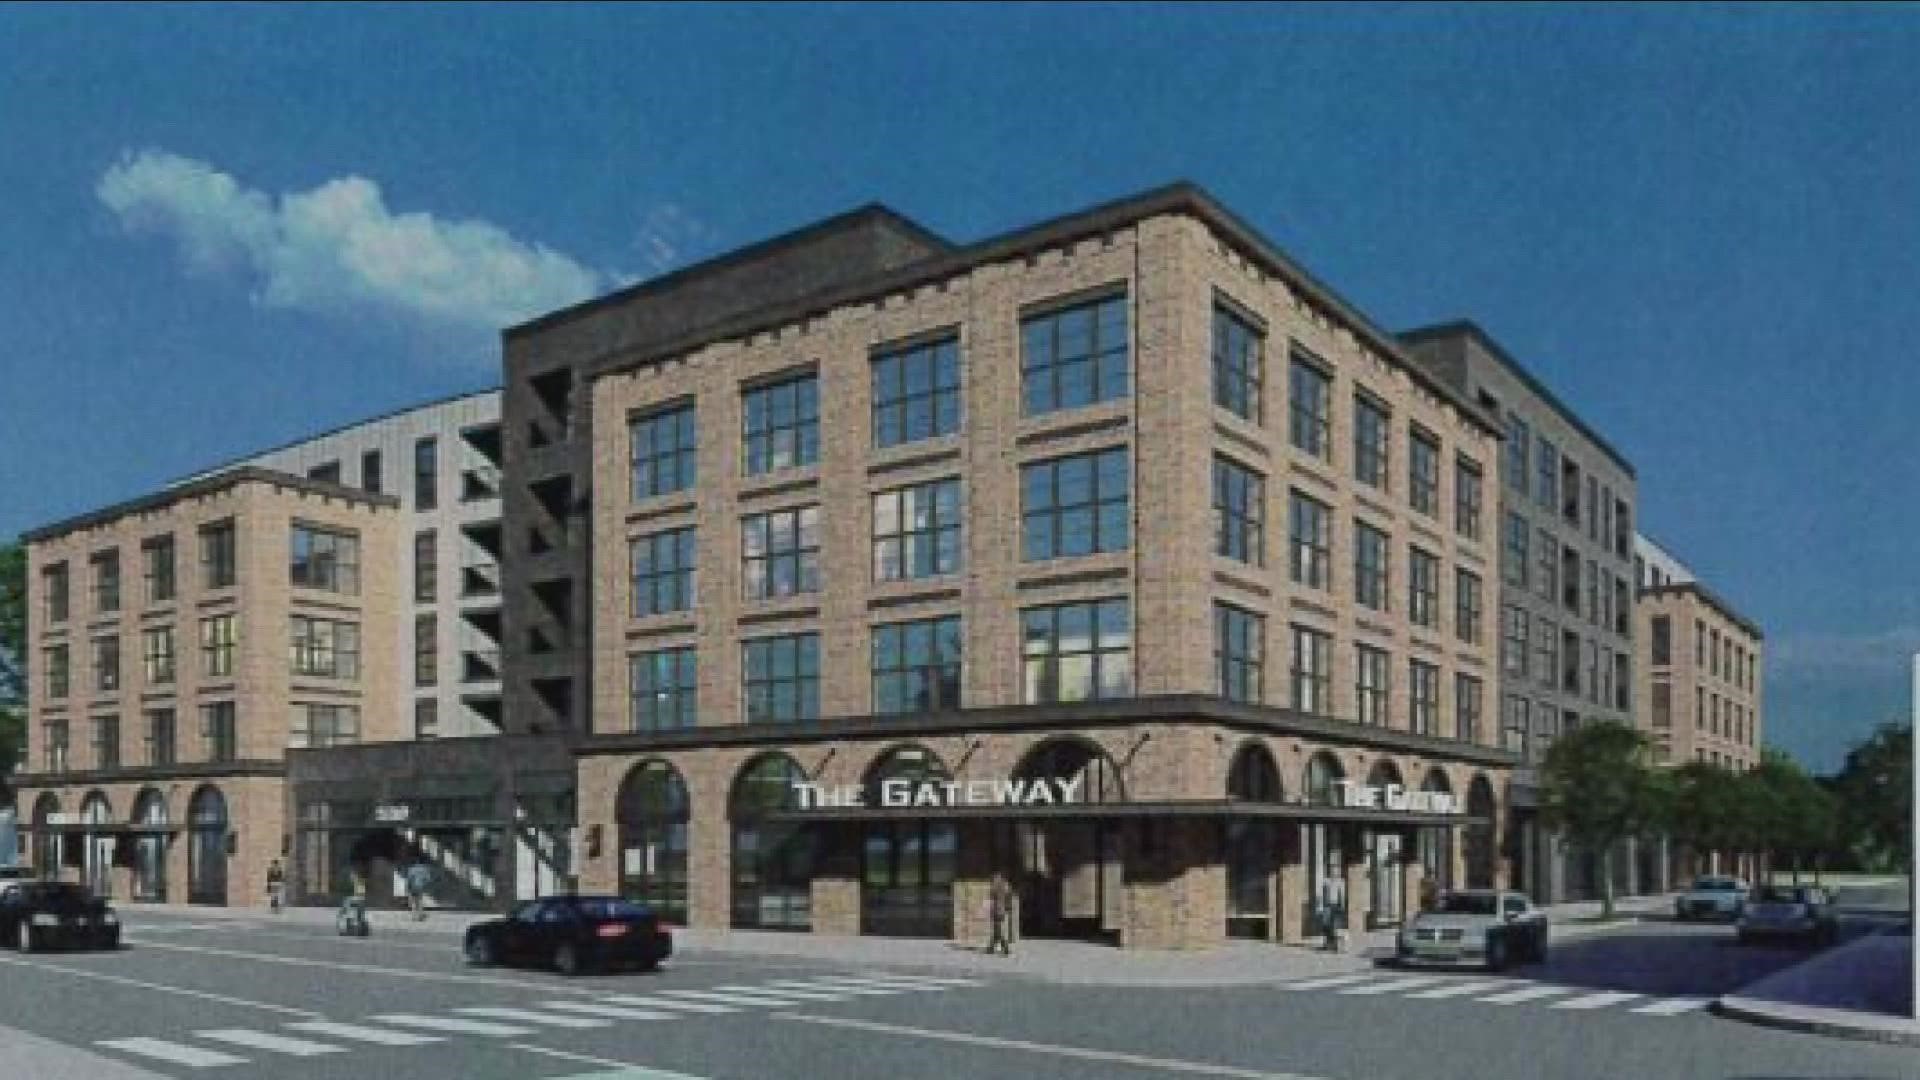 The Gateway will be built at 539 Ridge Road. It will include 160 market rate apartments and 10,000 square feet of retail space on the ground floor.